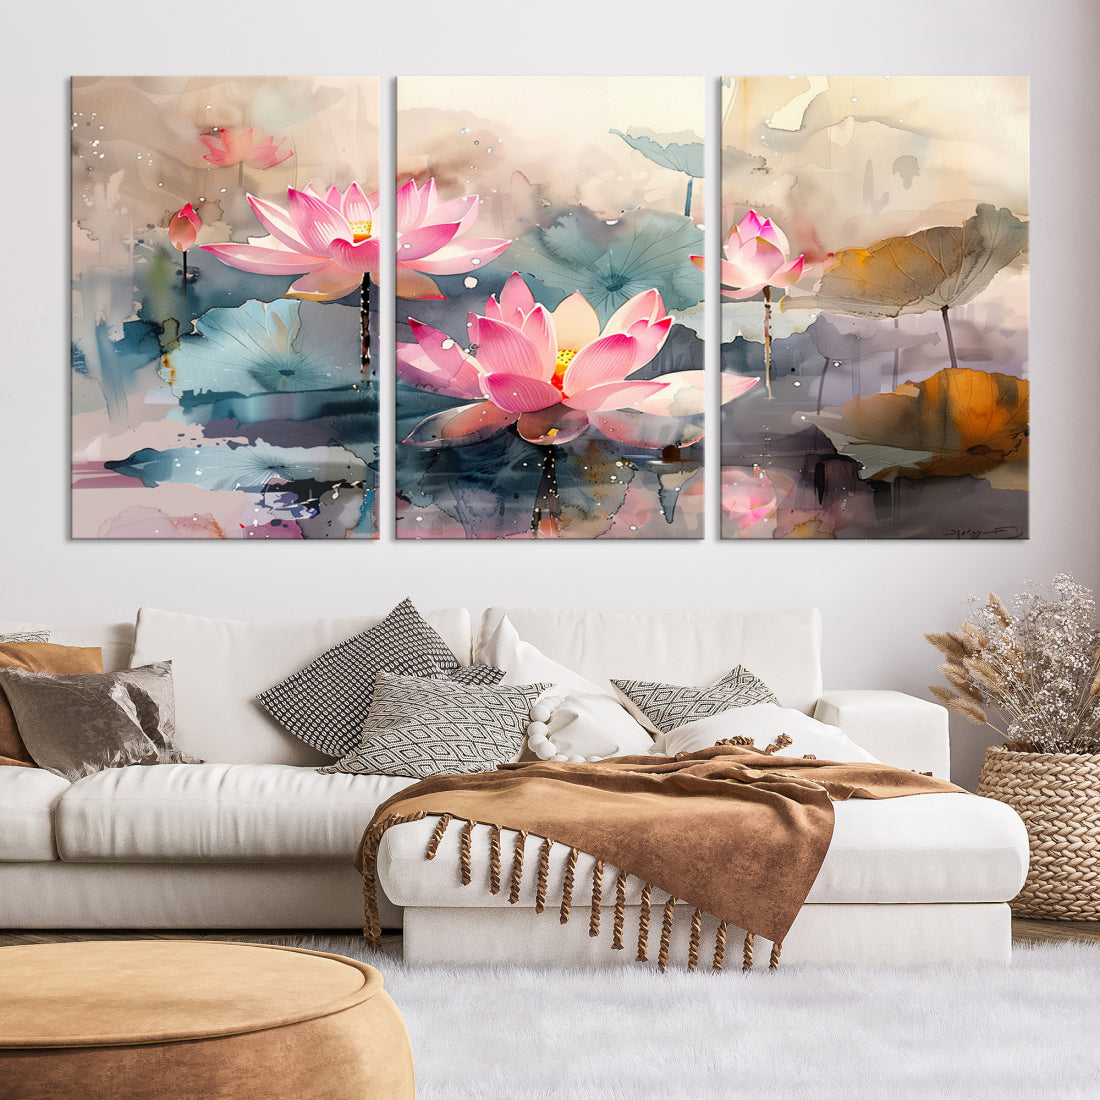 Flower abstract canvas Floral wall art print, Colorful modern artwork, Above bed decor